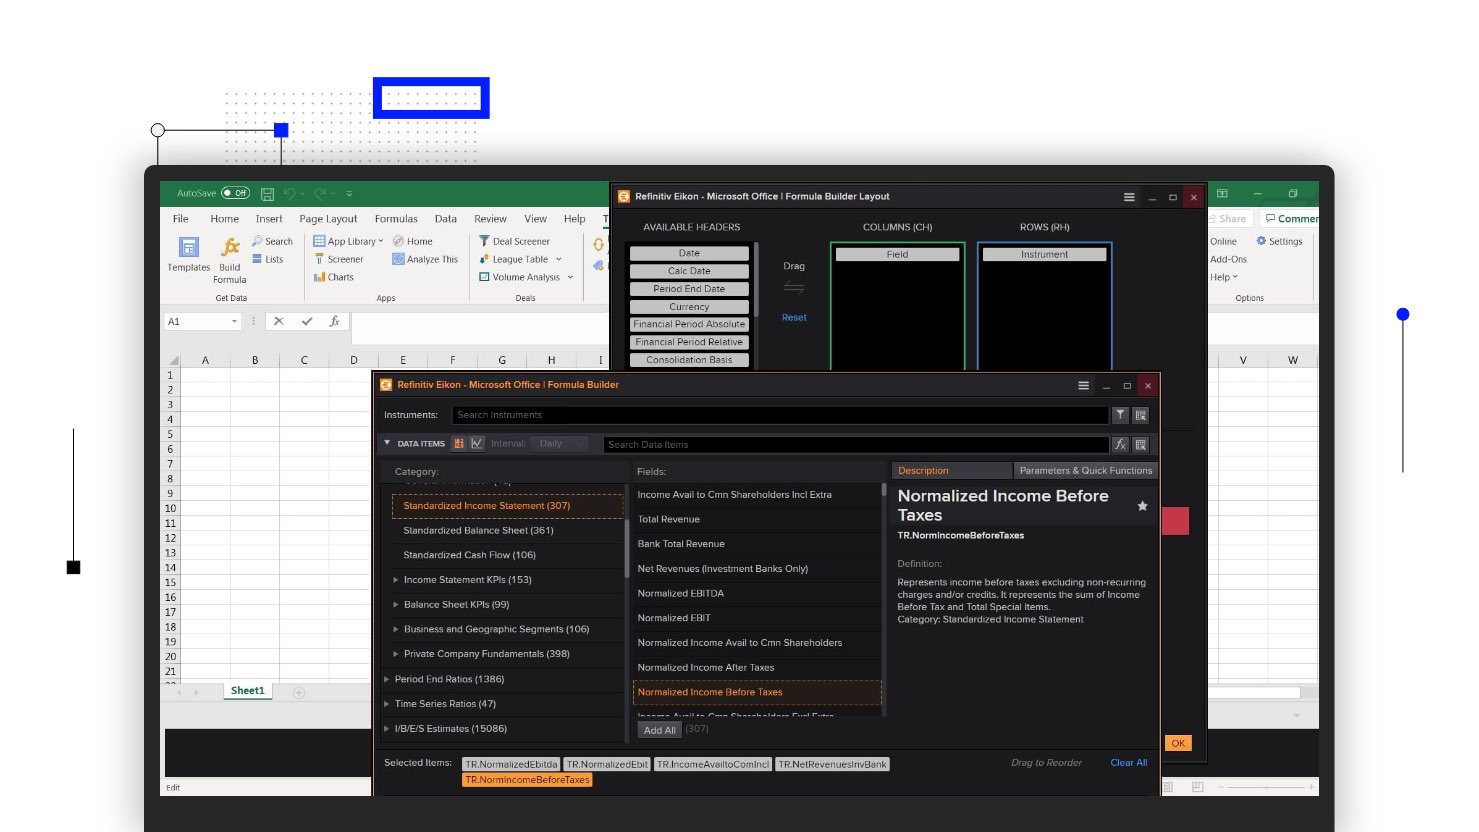 Screenshot of the advanced Research Search app in Eikon